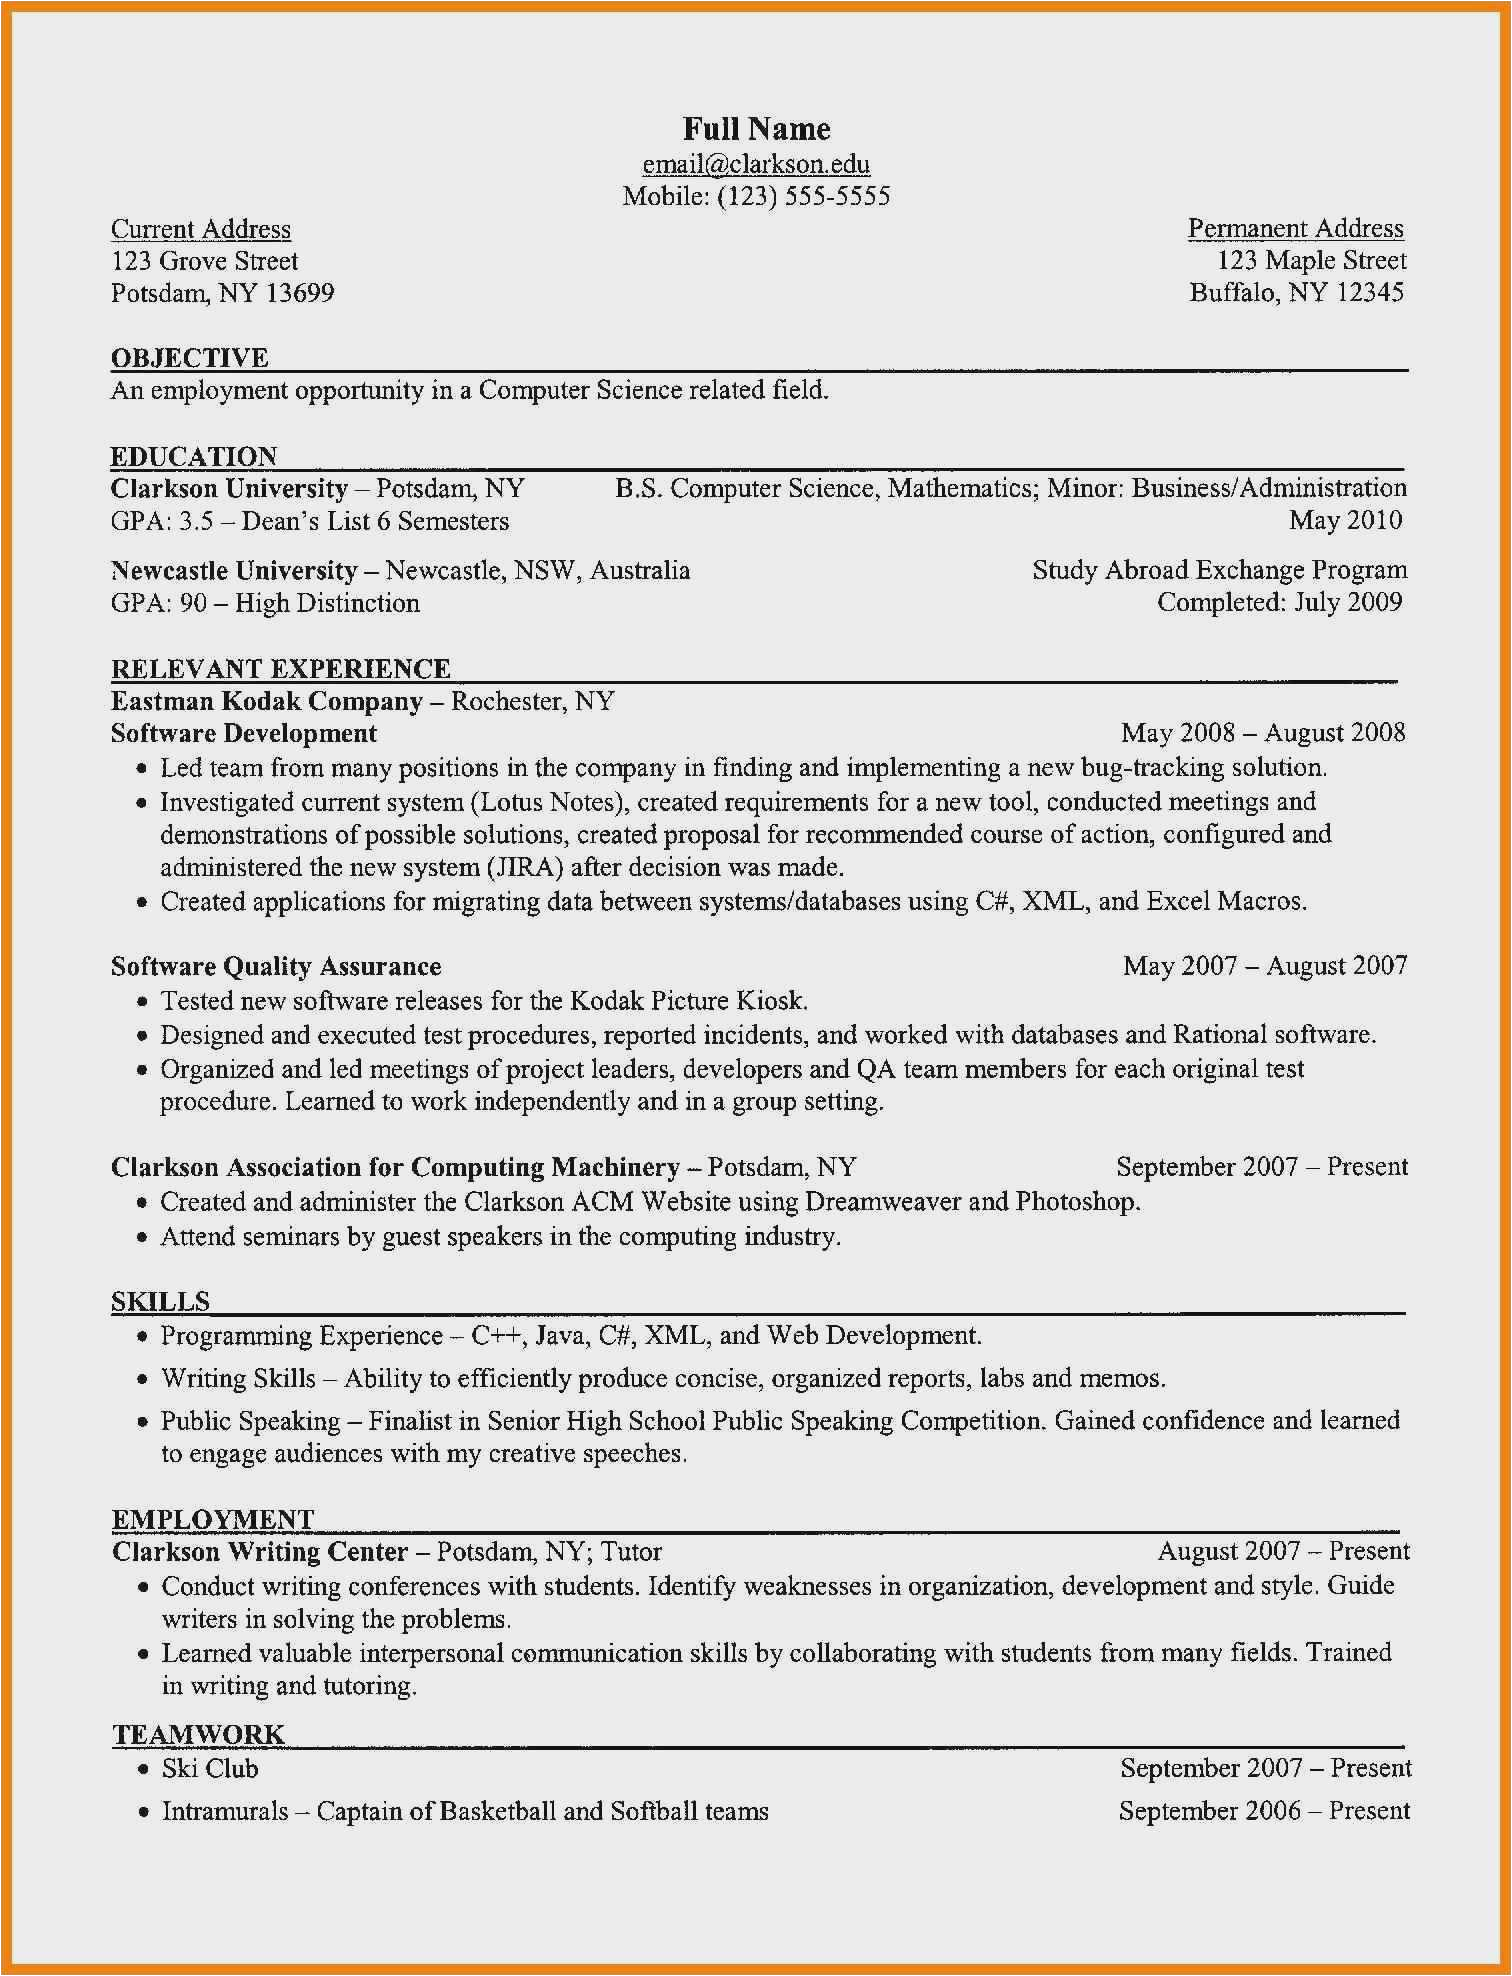 Free Sample Resume for Accounting Clerk Accounting Clerk Resume Download 50 Collections